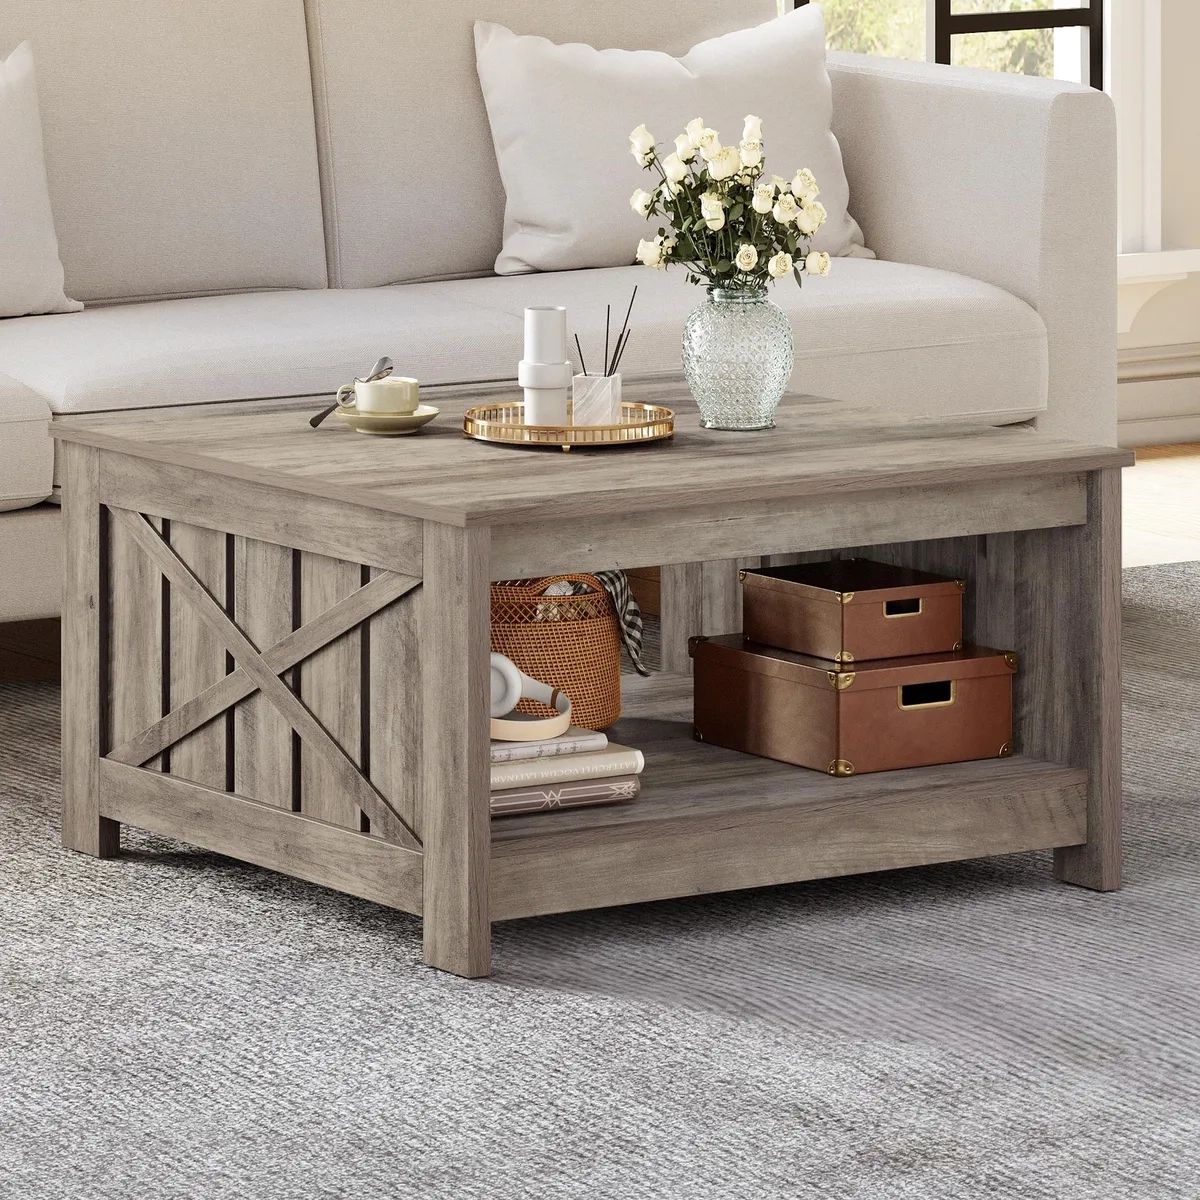 Square Coffee Table With Storage Farmhouse Cocktail Table W/ Open Storage  Shelf | Ebay In Coffee Tables With Storage And Barn Doors (Photo 10 of 15)